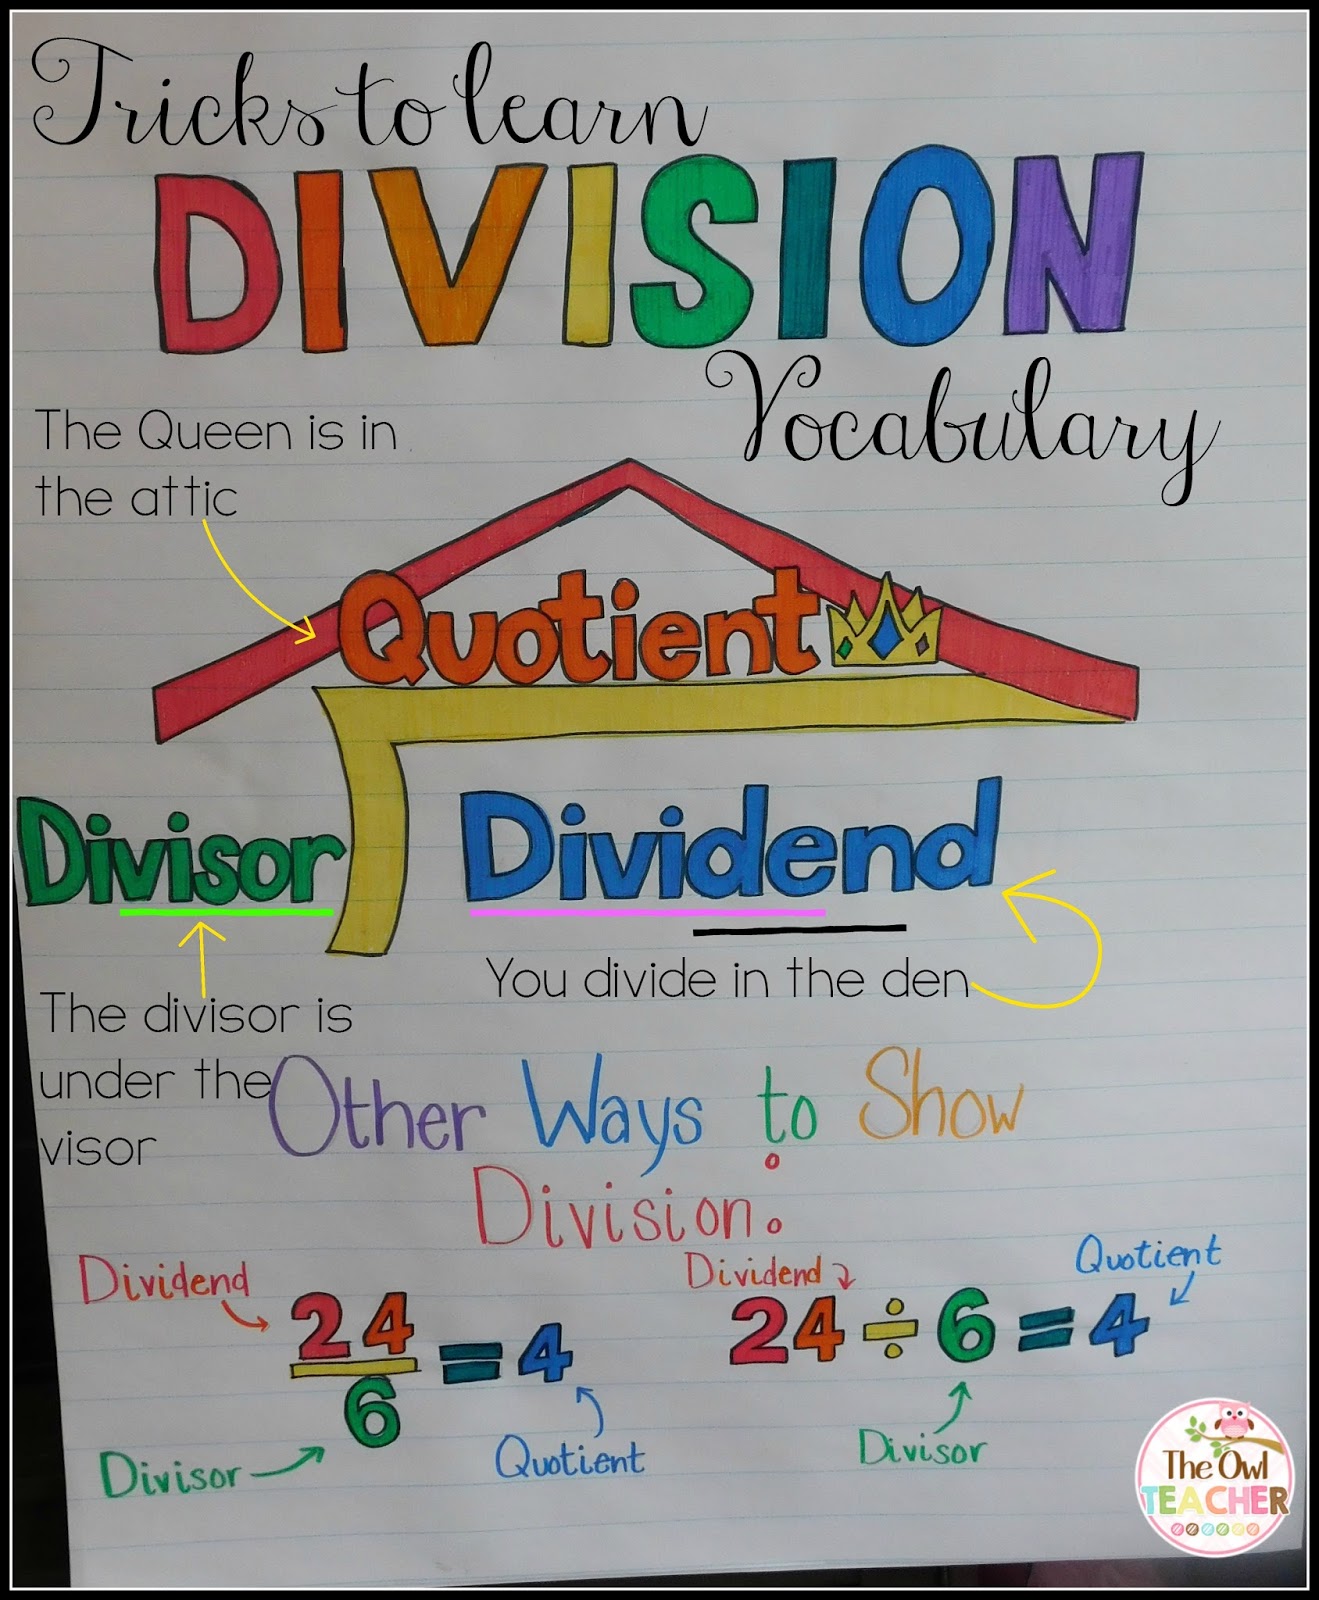 Anchor Chart For Long Division